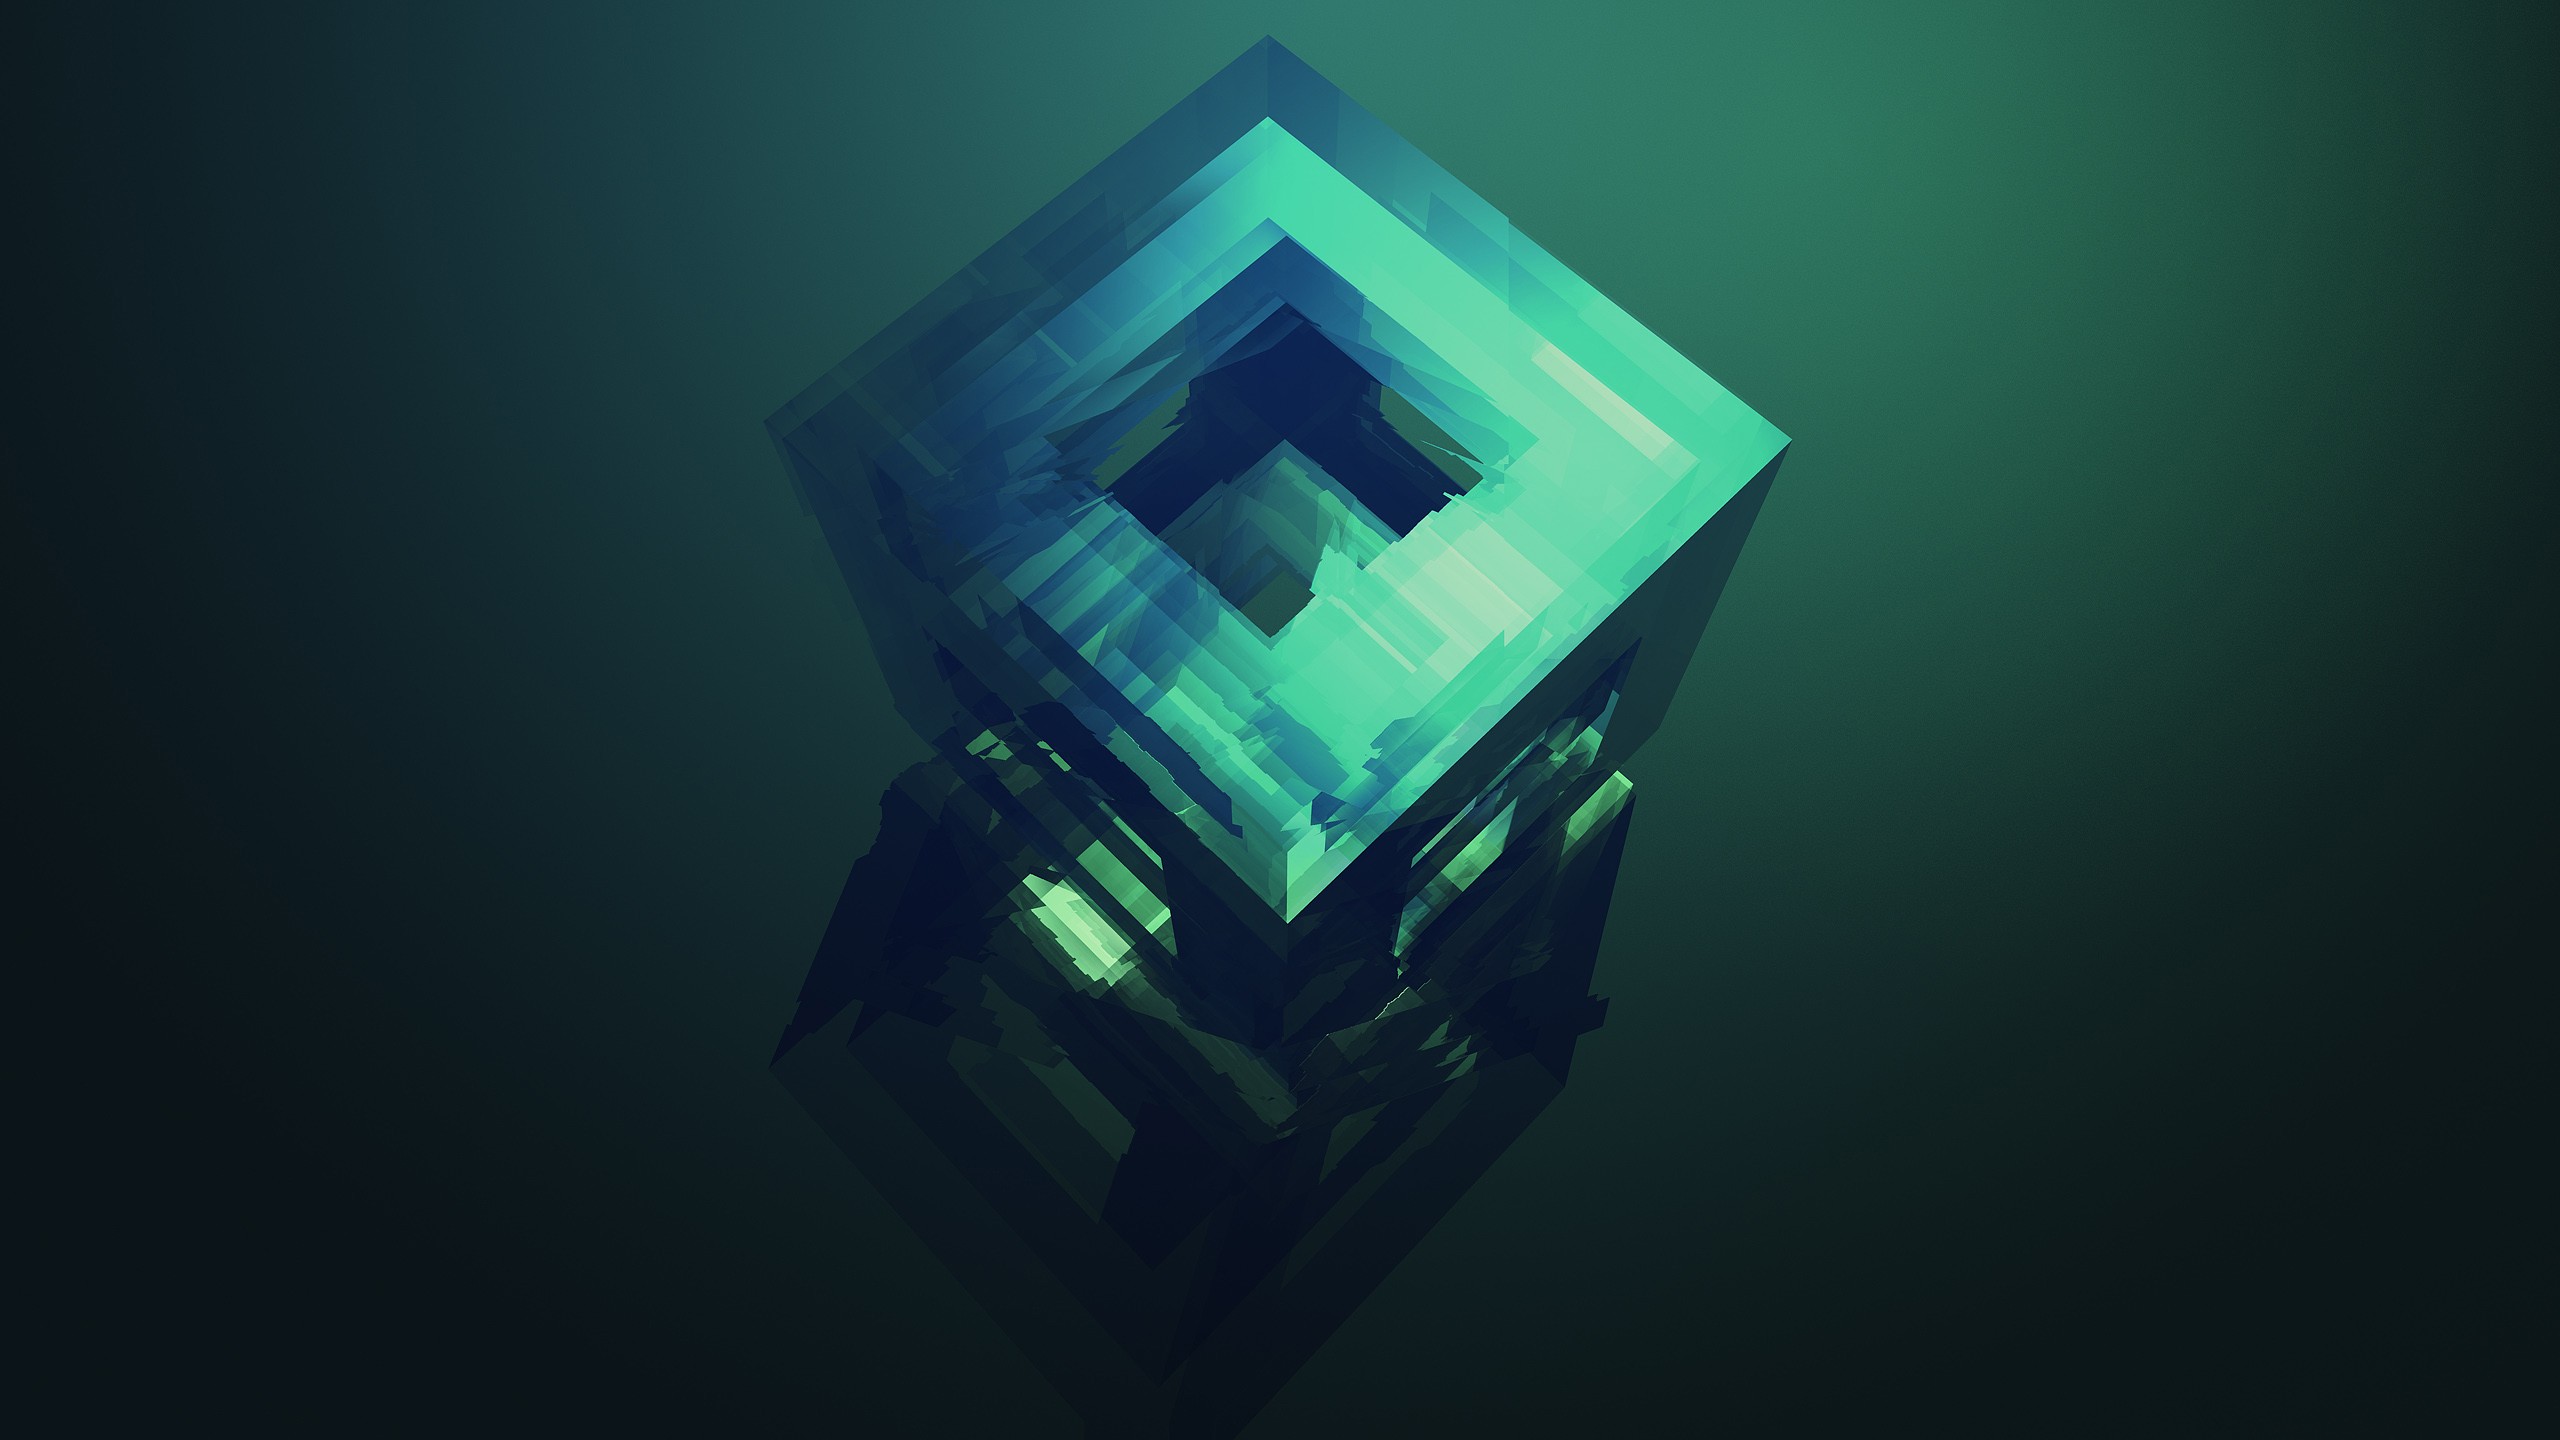 General 2560x1440 artwork colorful Justin Maller facets gradient minimalism cube simple background digital art abstract 3D Blocks 3D Abstract CGI turquoise